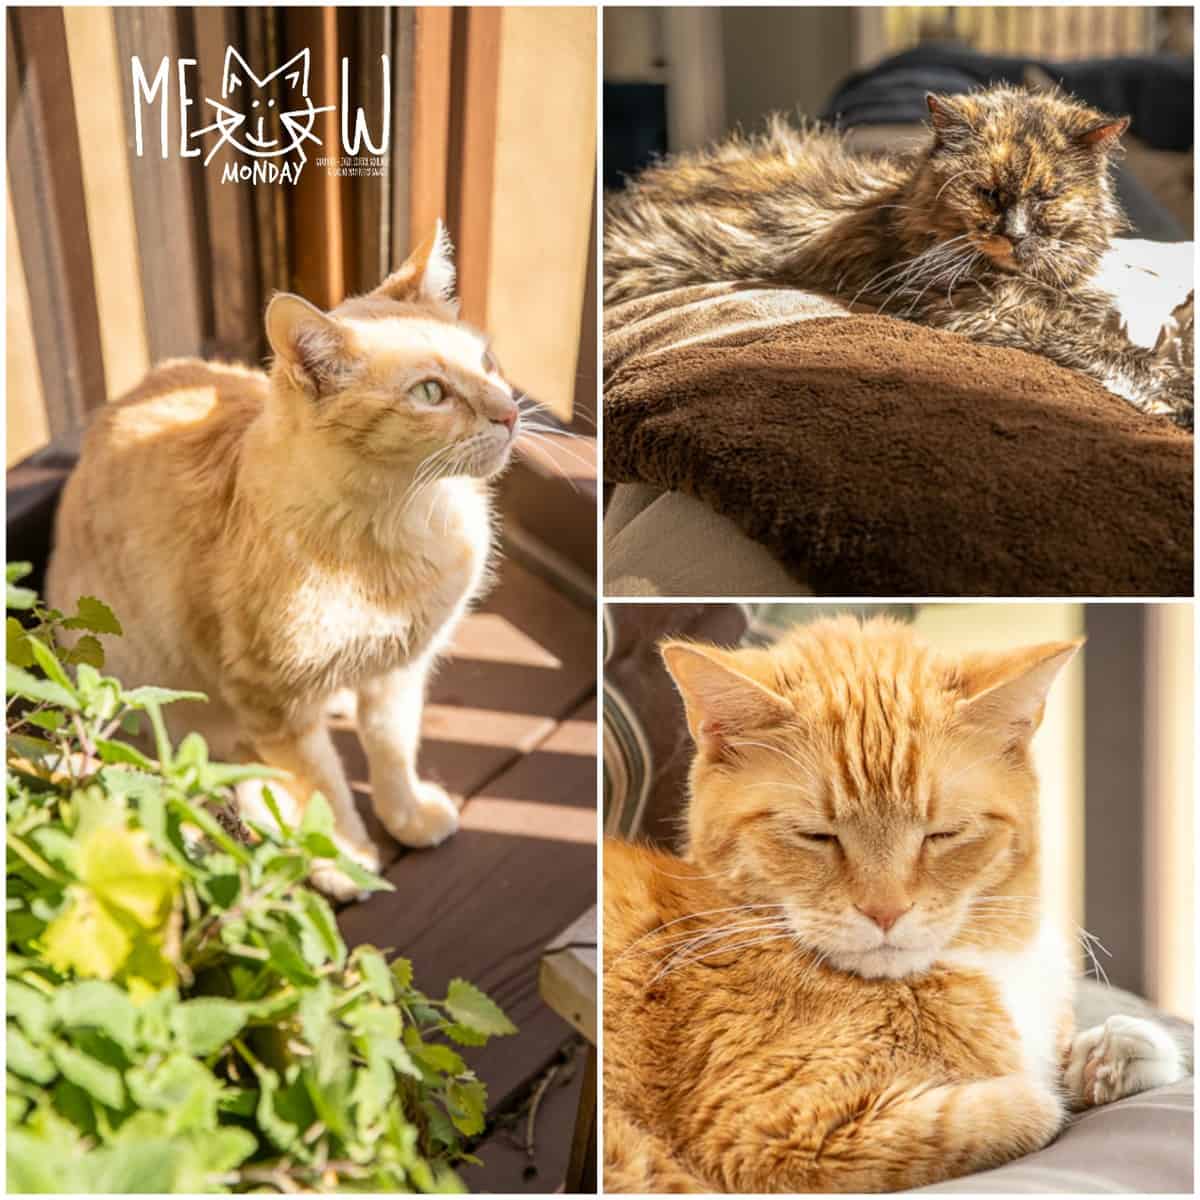 Pictures of three cats